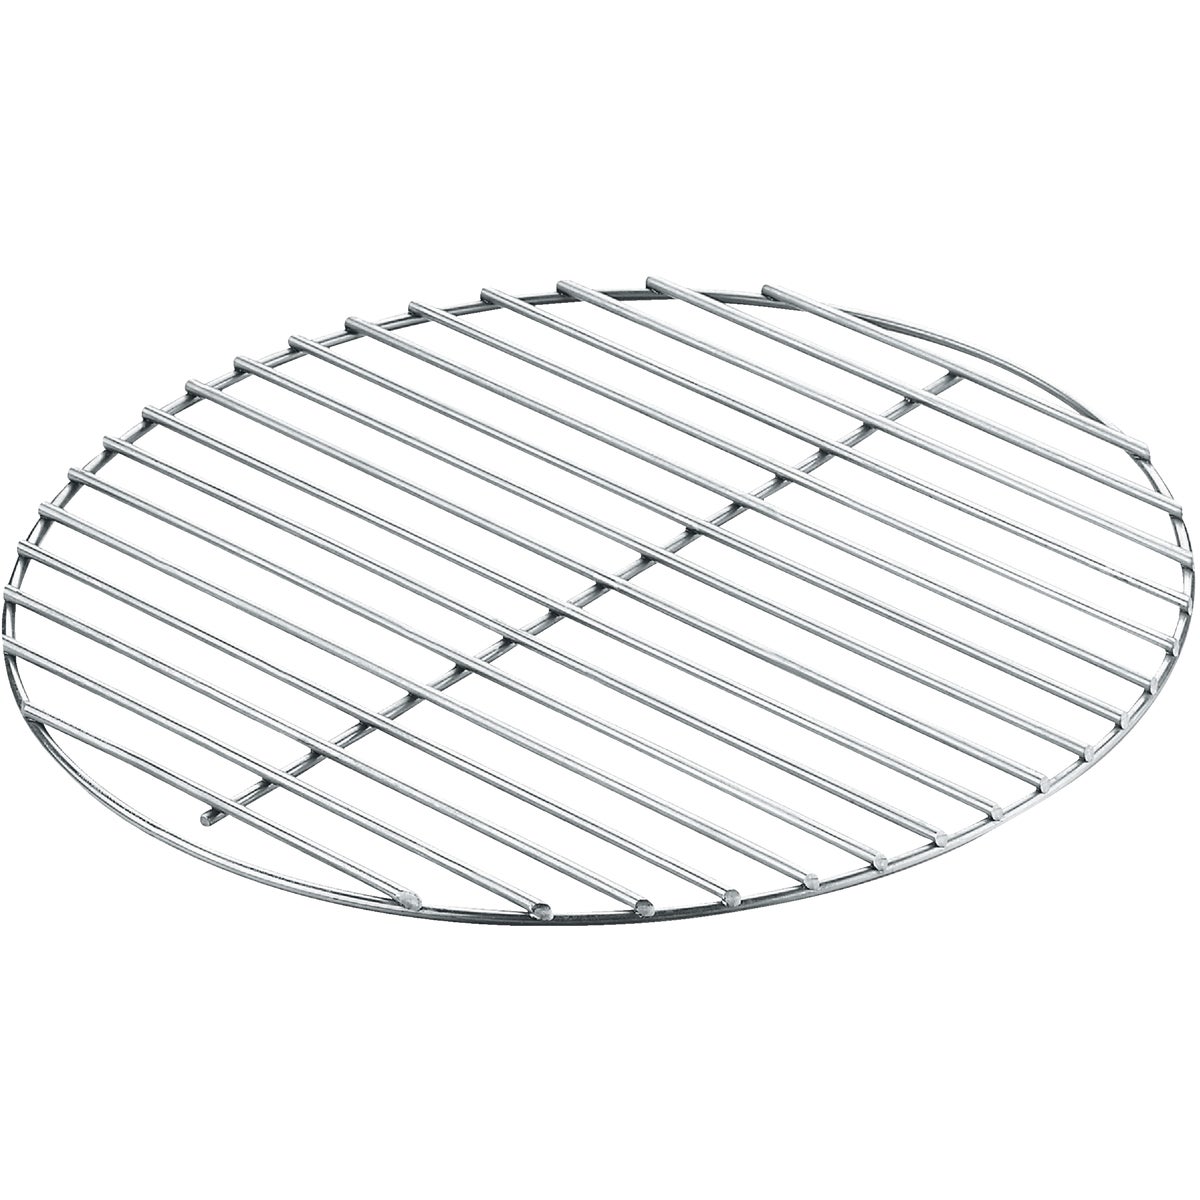 18.5″ KETTLE GRILL GRATE